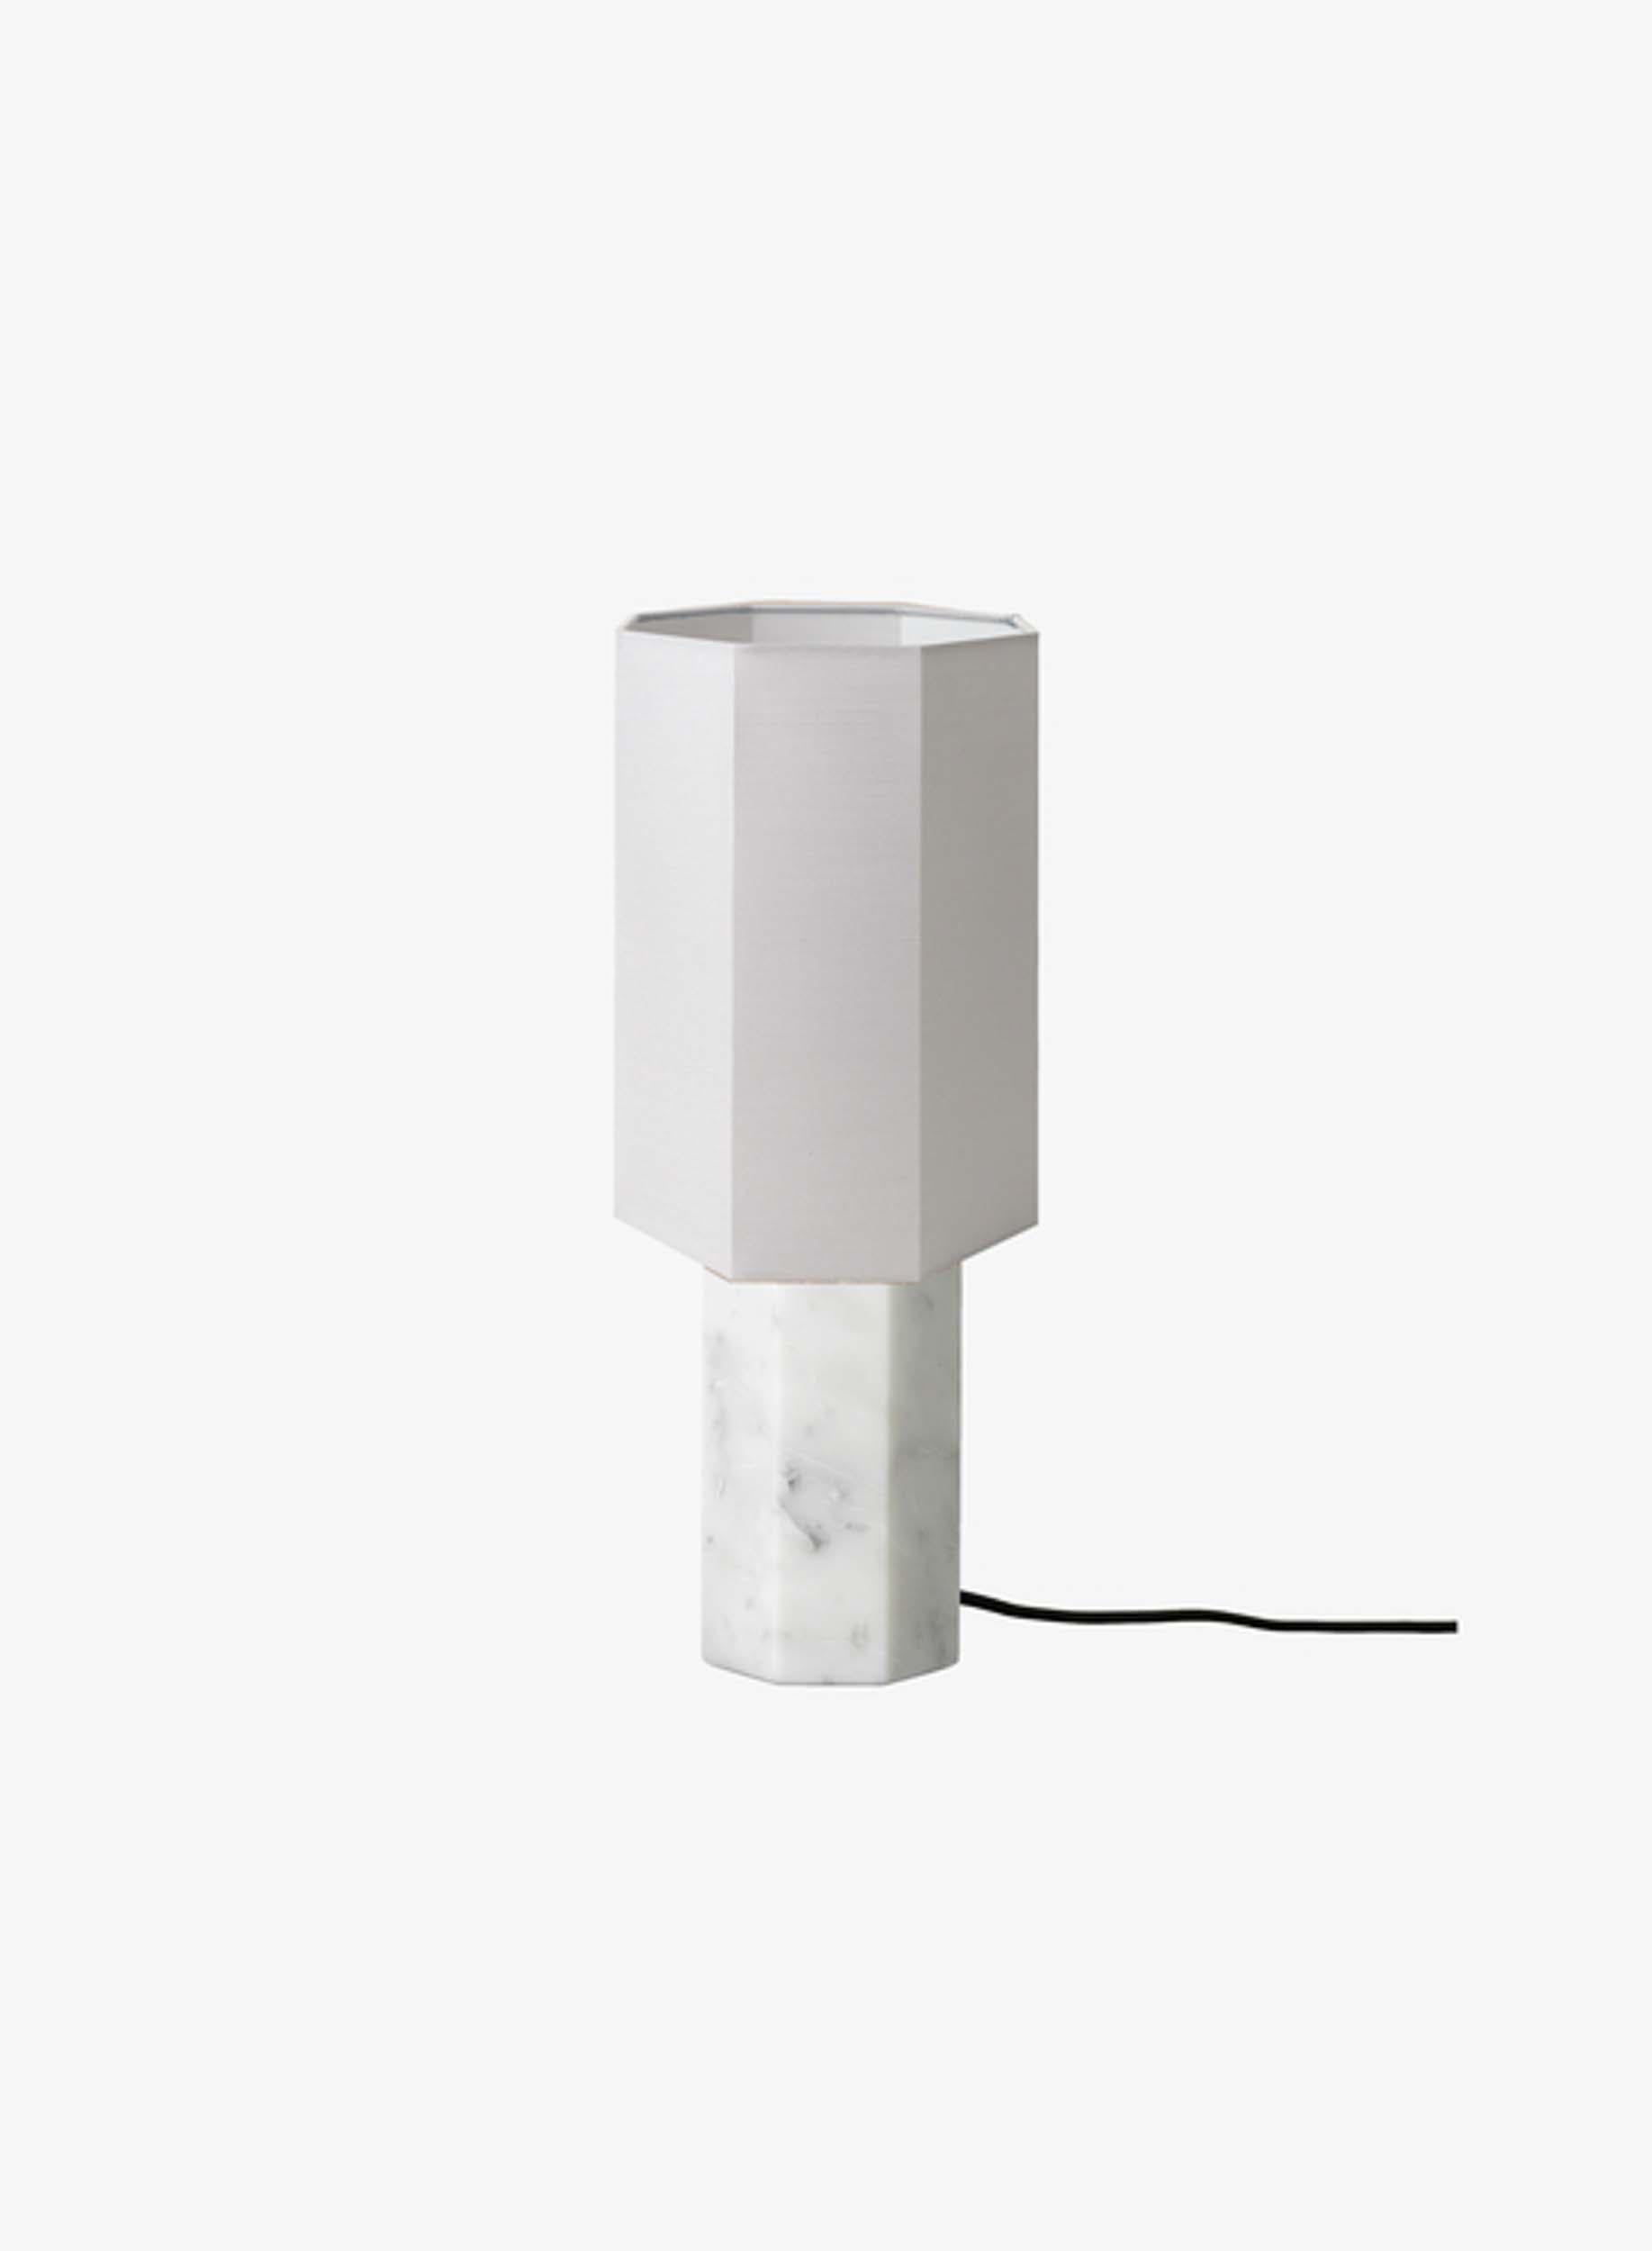 Table Lamp 'The Eight over Eight' by Louise Roe 

Designed in Denmark and manufactured in Italy.

Model shown in the picture: 
Base: White marble
Lampshade: Light grey 

Dimensions : 
Height: 36 cm
Diameter: 12.5 cm

Louise Roe is a